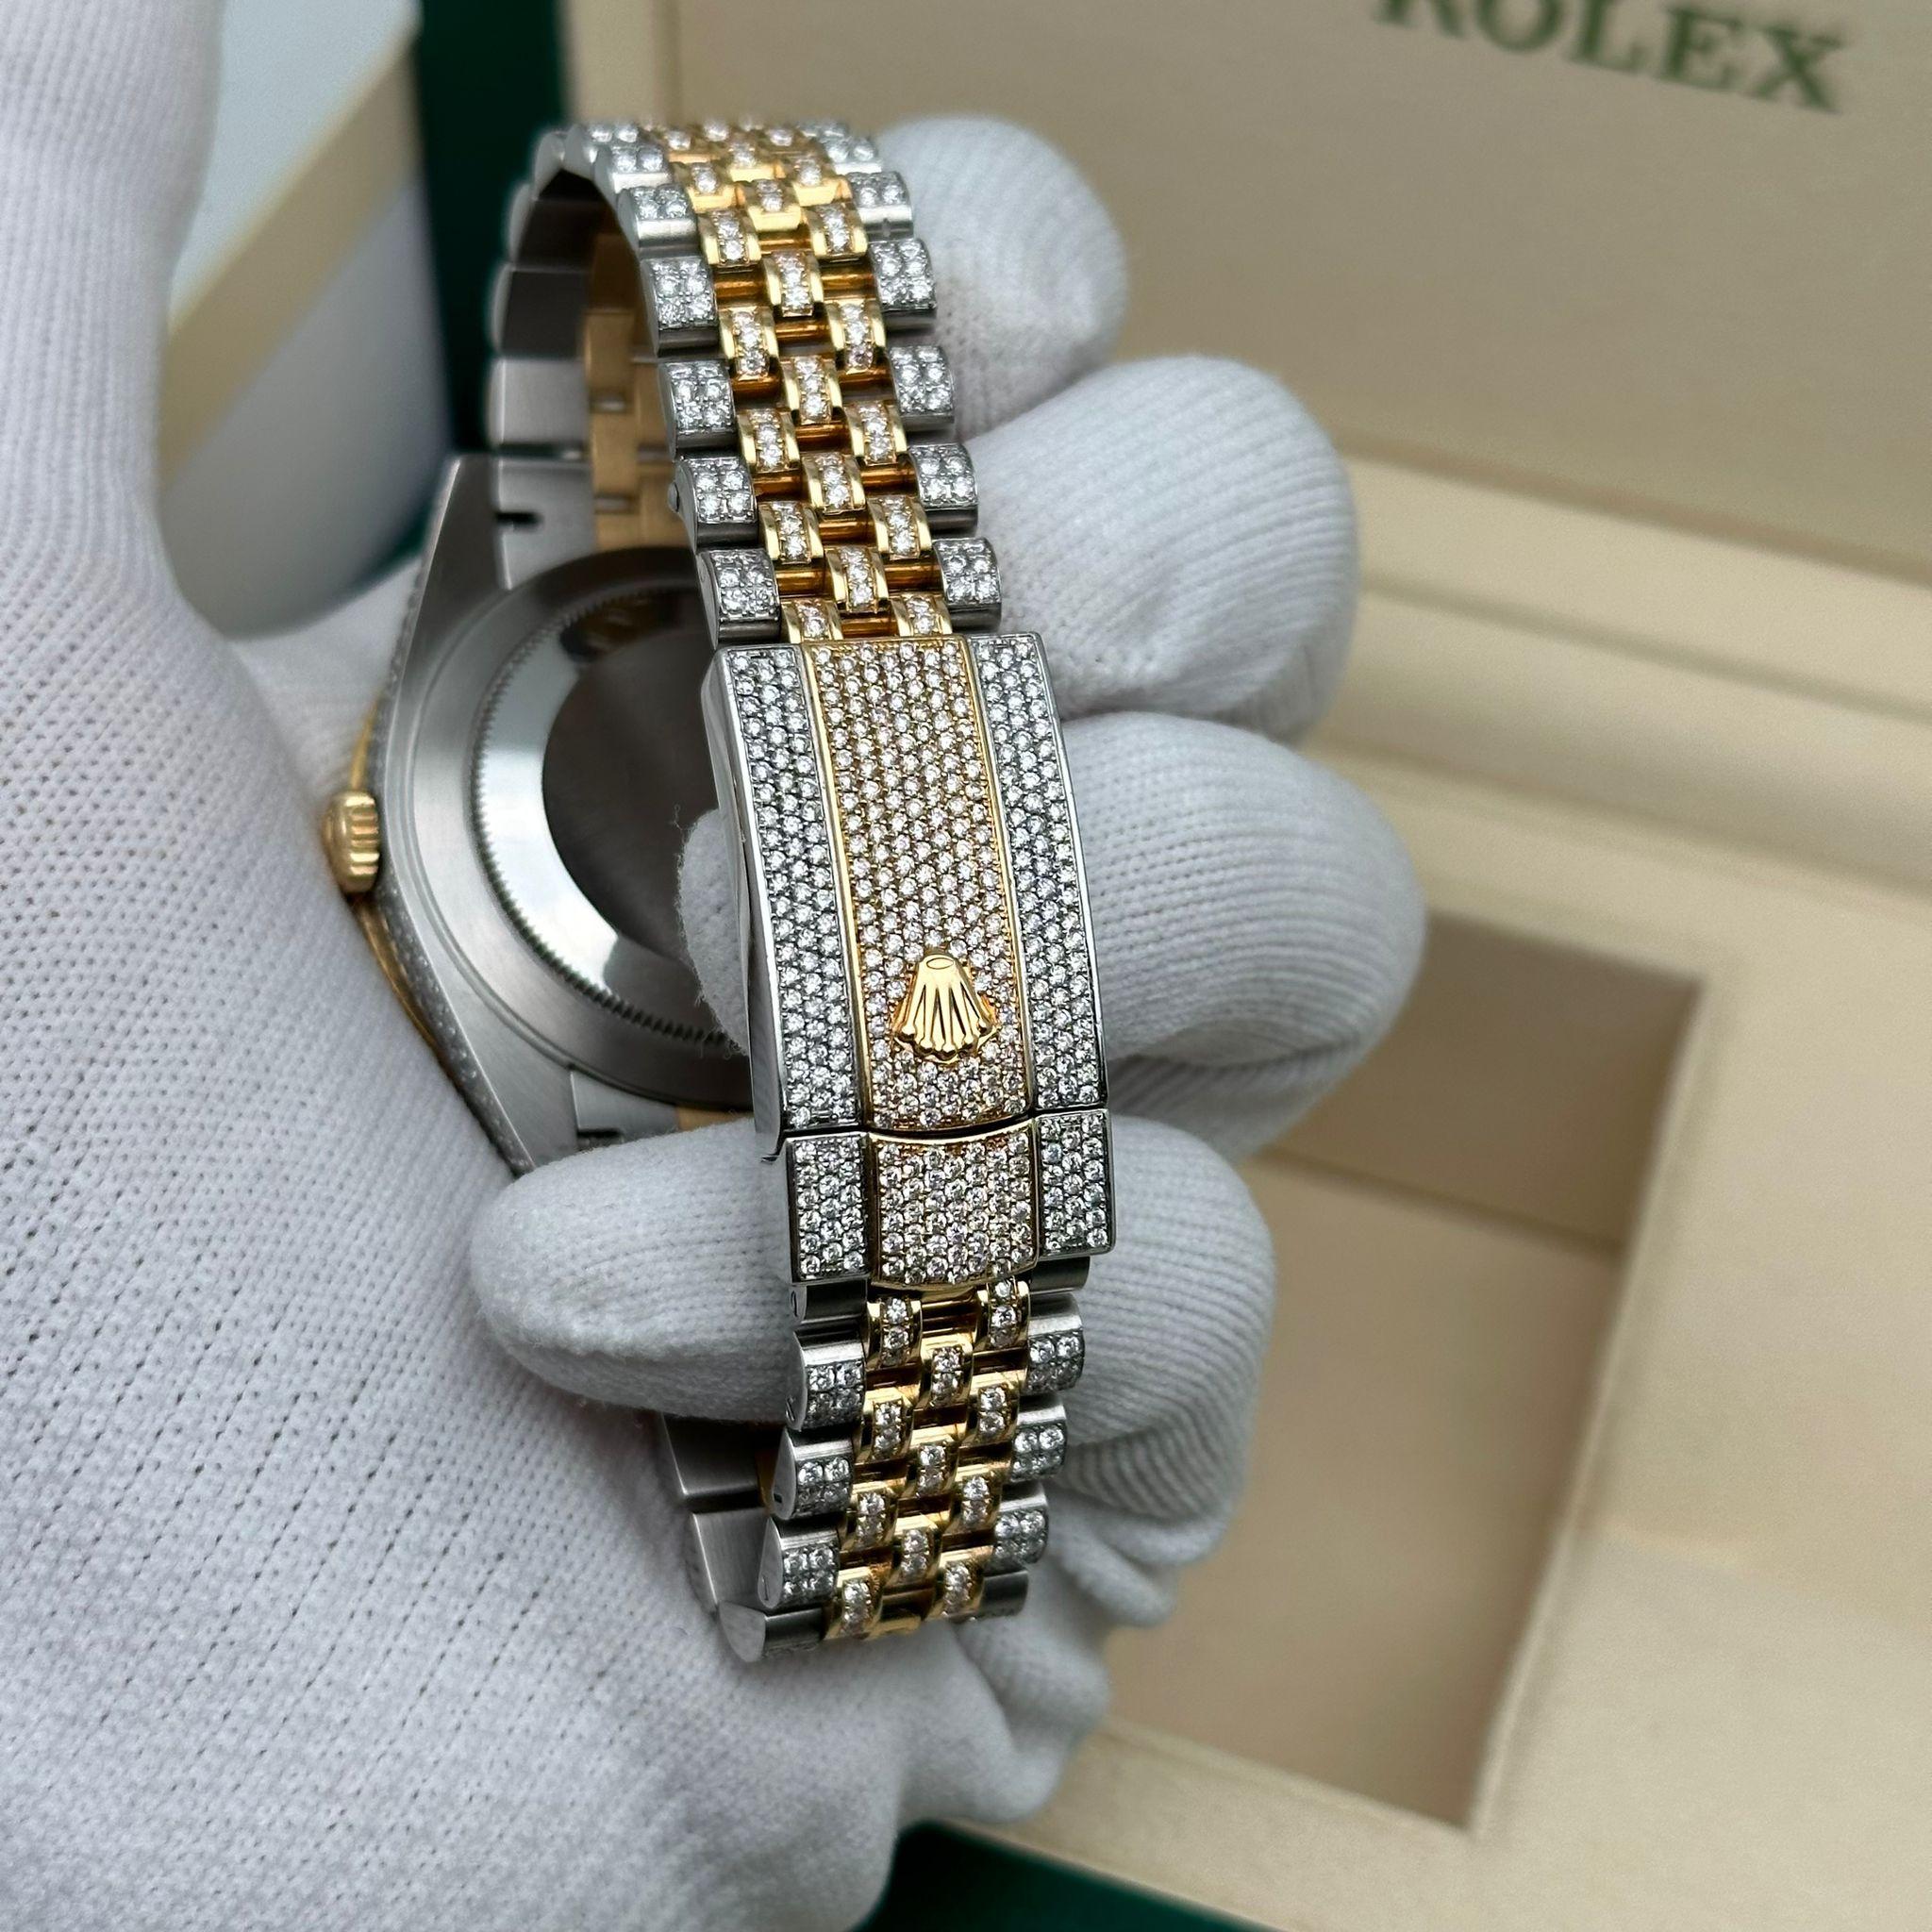 Rolex Datejust 41 18K Gold SteelCustom Fully Iced Out Jubilee Watch 126333 For Sale 4